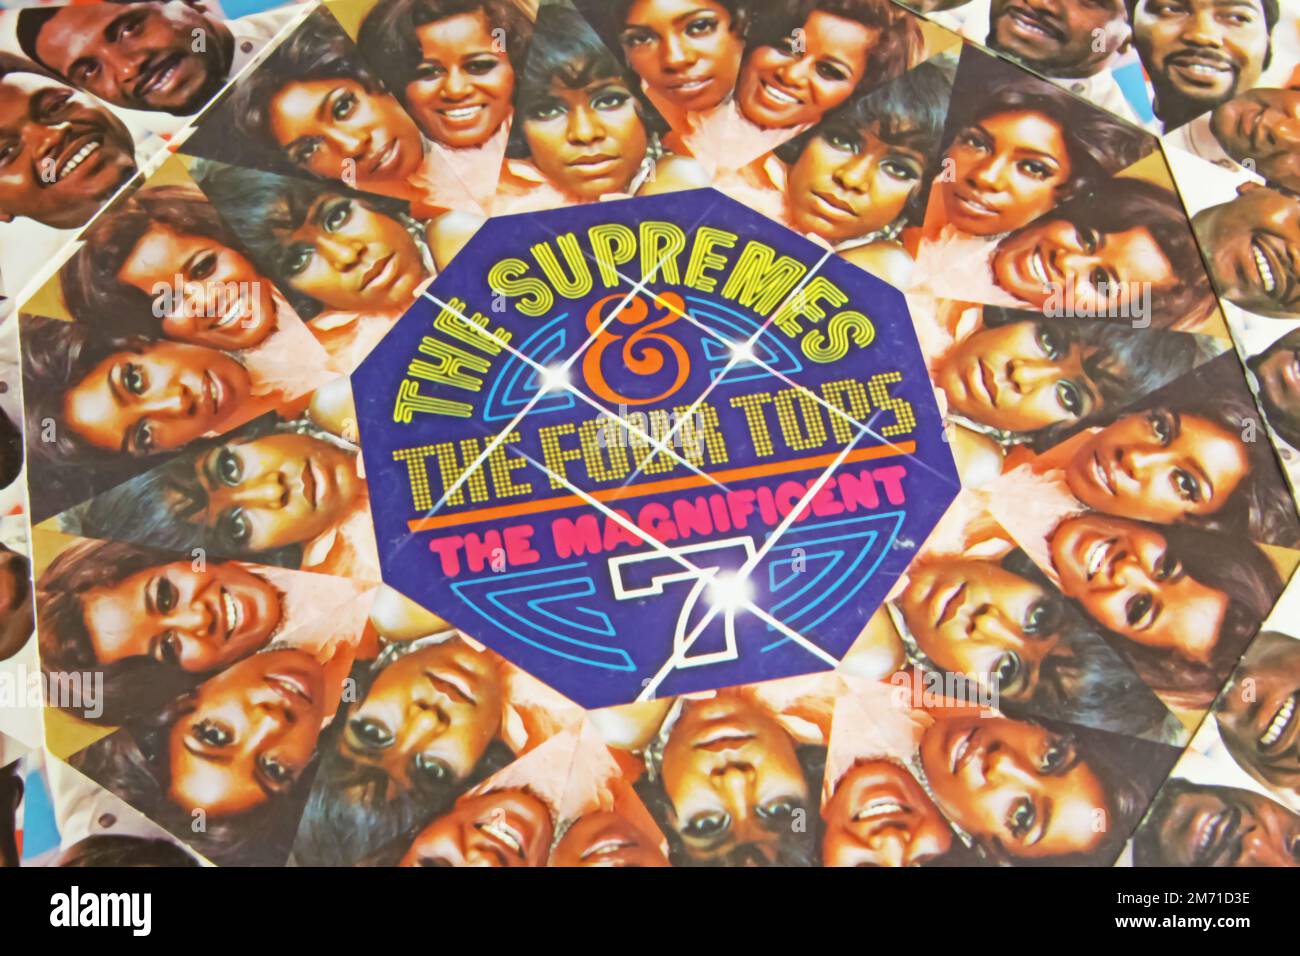 Viersen, Germany - May 9. 2022: Closeup of soul vinyl record motown album cover the magnificent 7 with Supremes and Four Tops in 60s Stock Photo